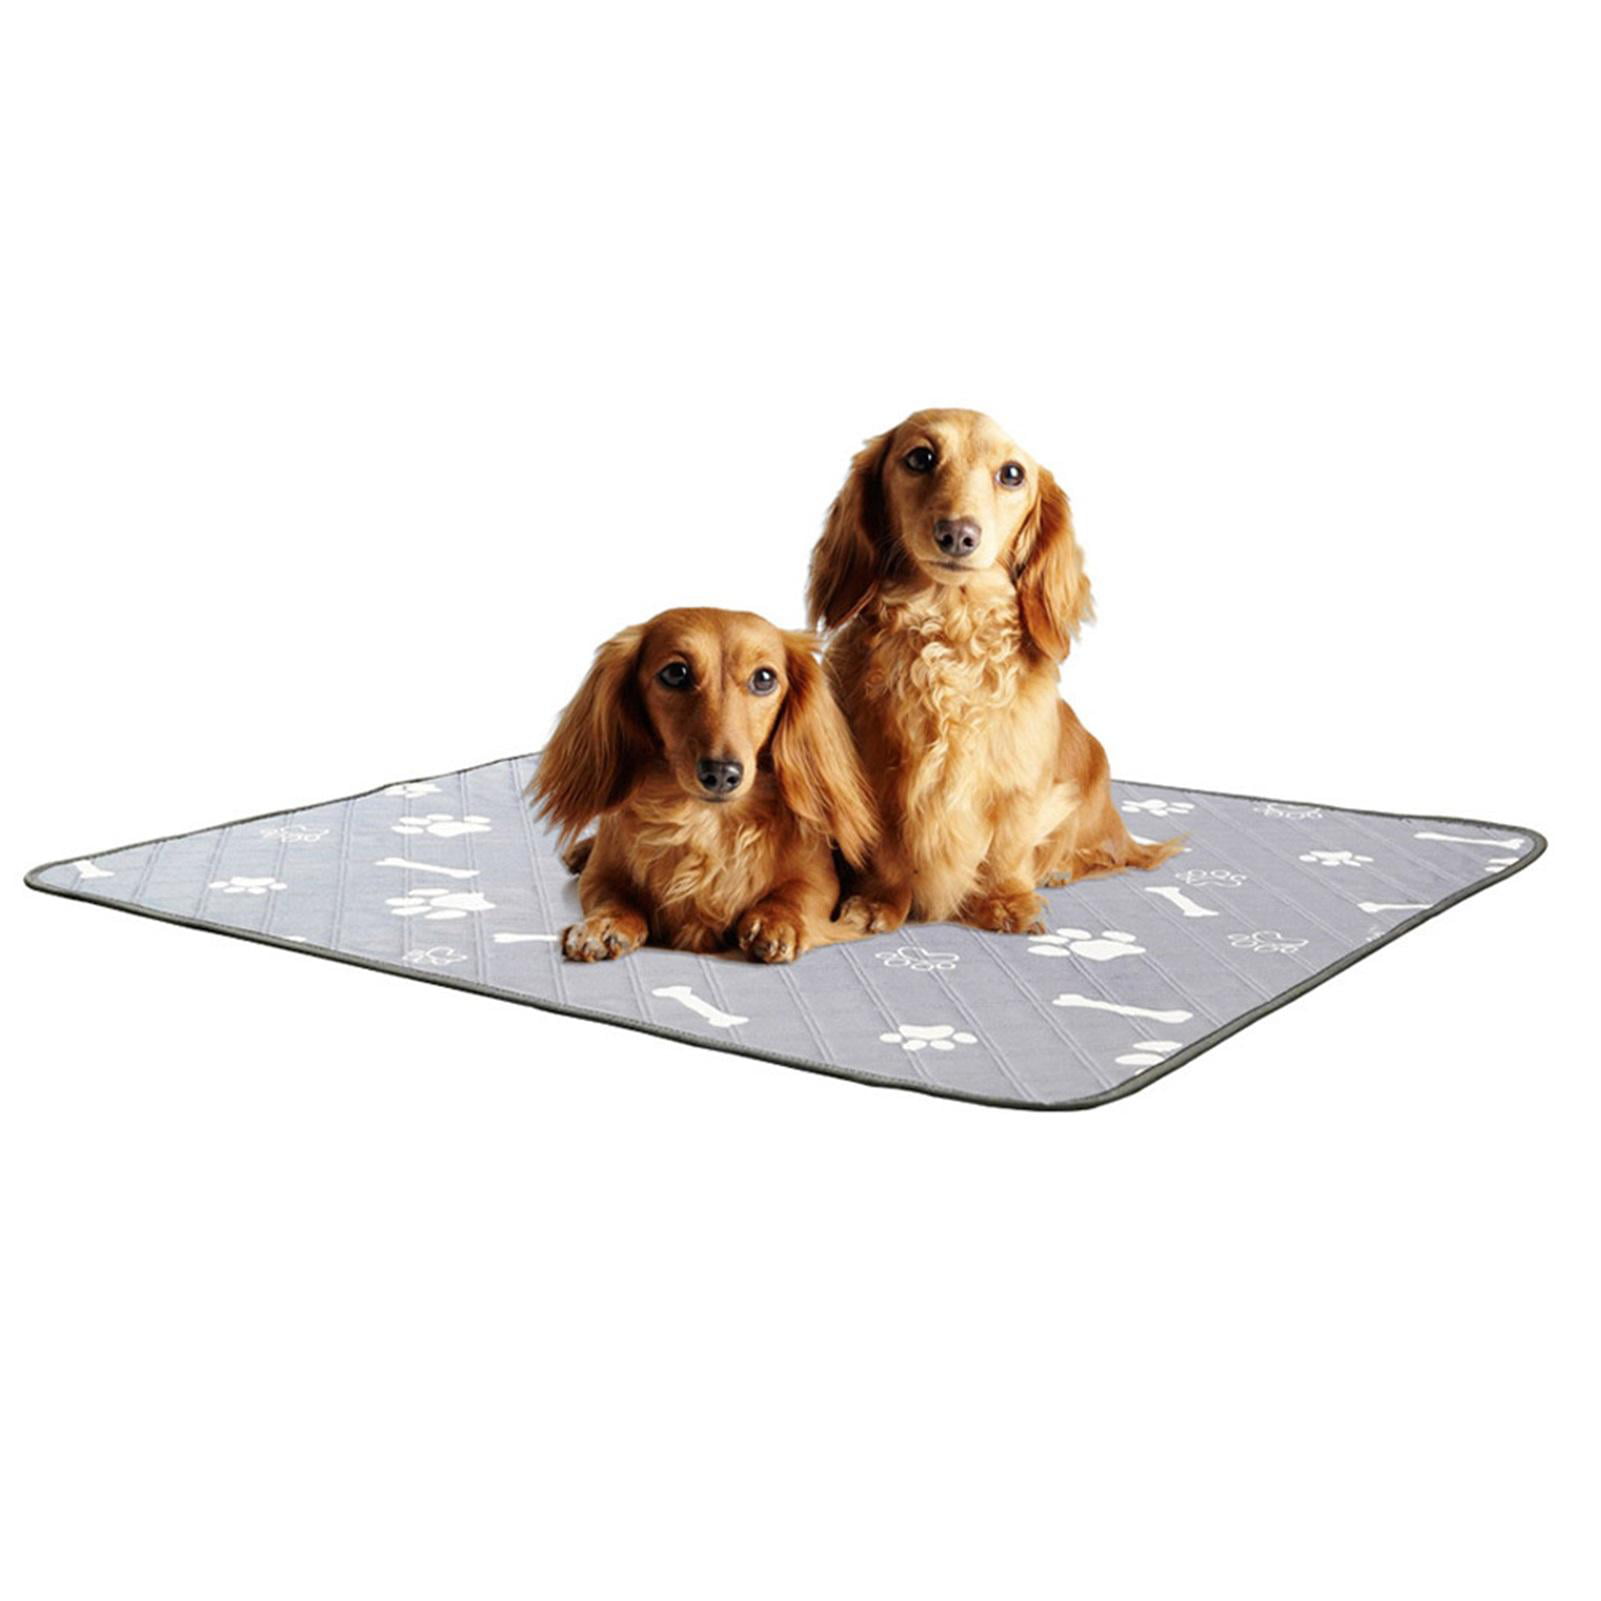 1-30x30 Washable Reusable Dog Training Puppy Pee Pads Piddle Potty Tan backing 